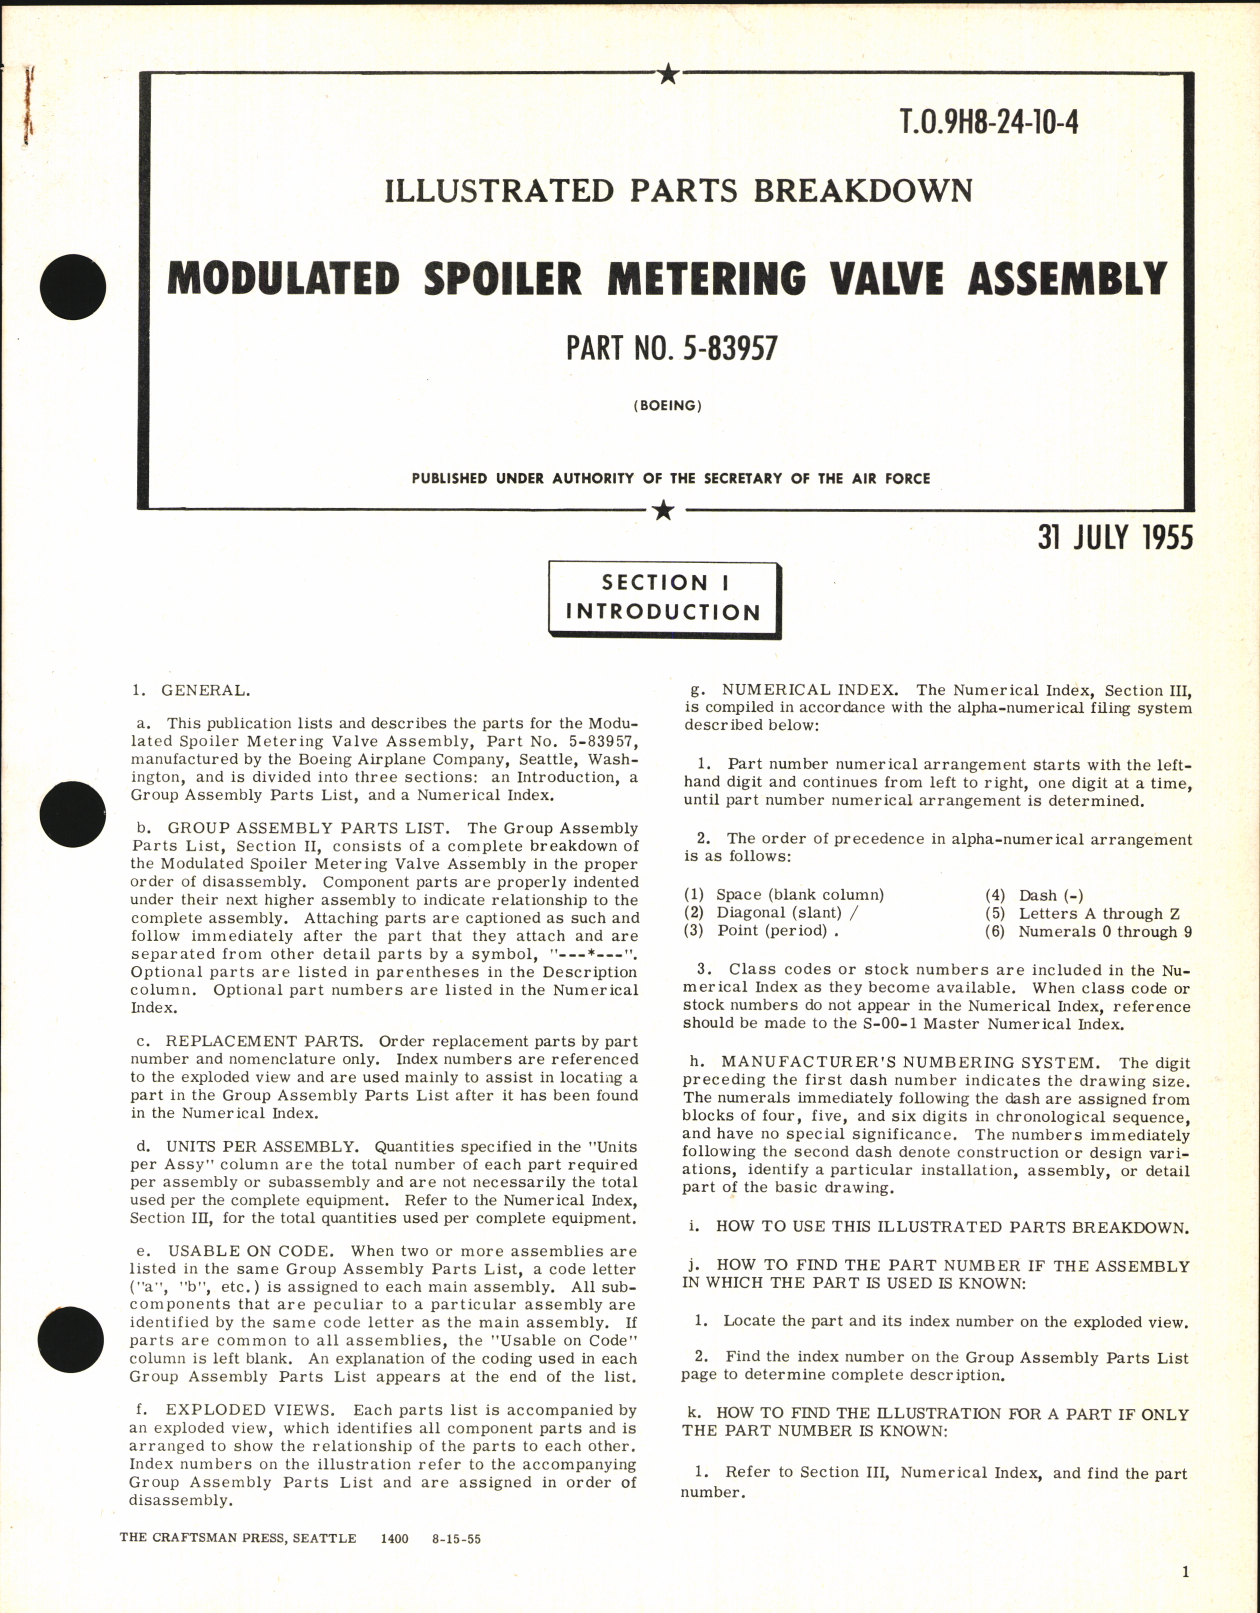 Sample page 1 from AirCorps Library document: Illustrated Parts Breakdown for Modulated Spoiler Metering Valve Assembly Part No. 5-83957